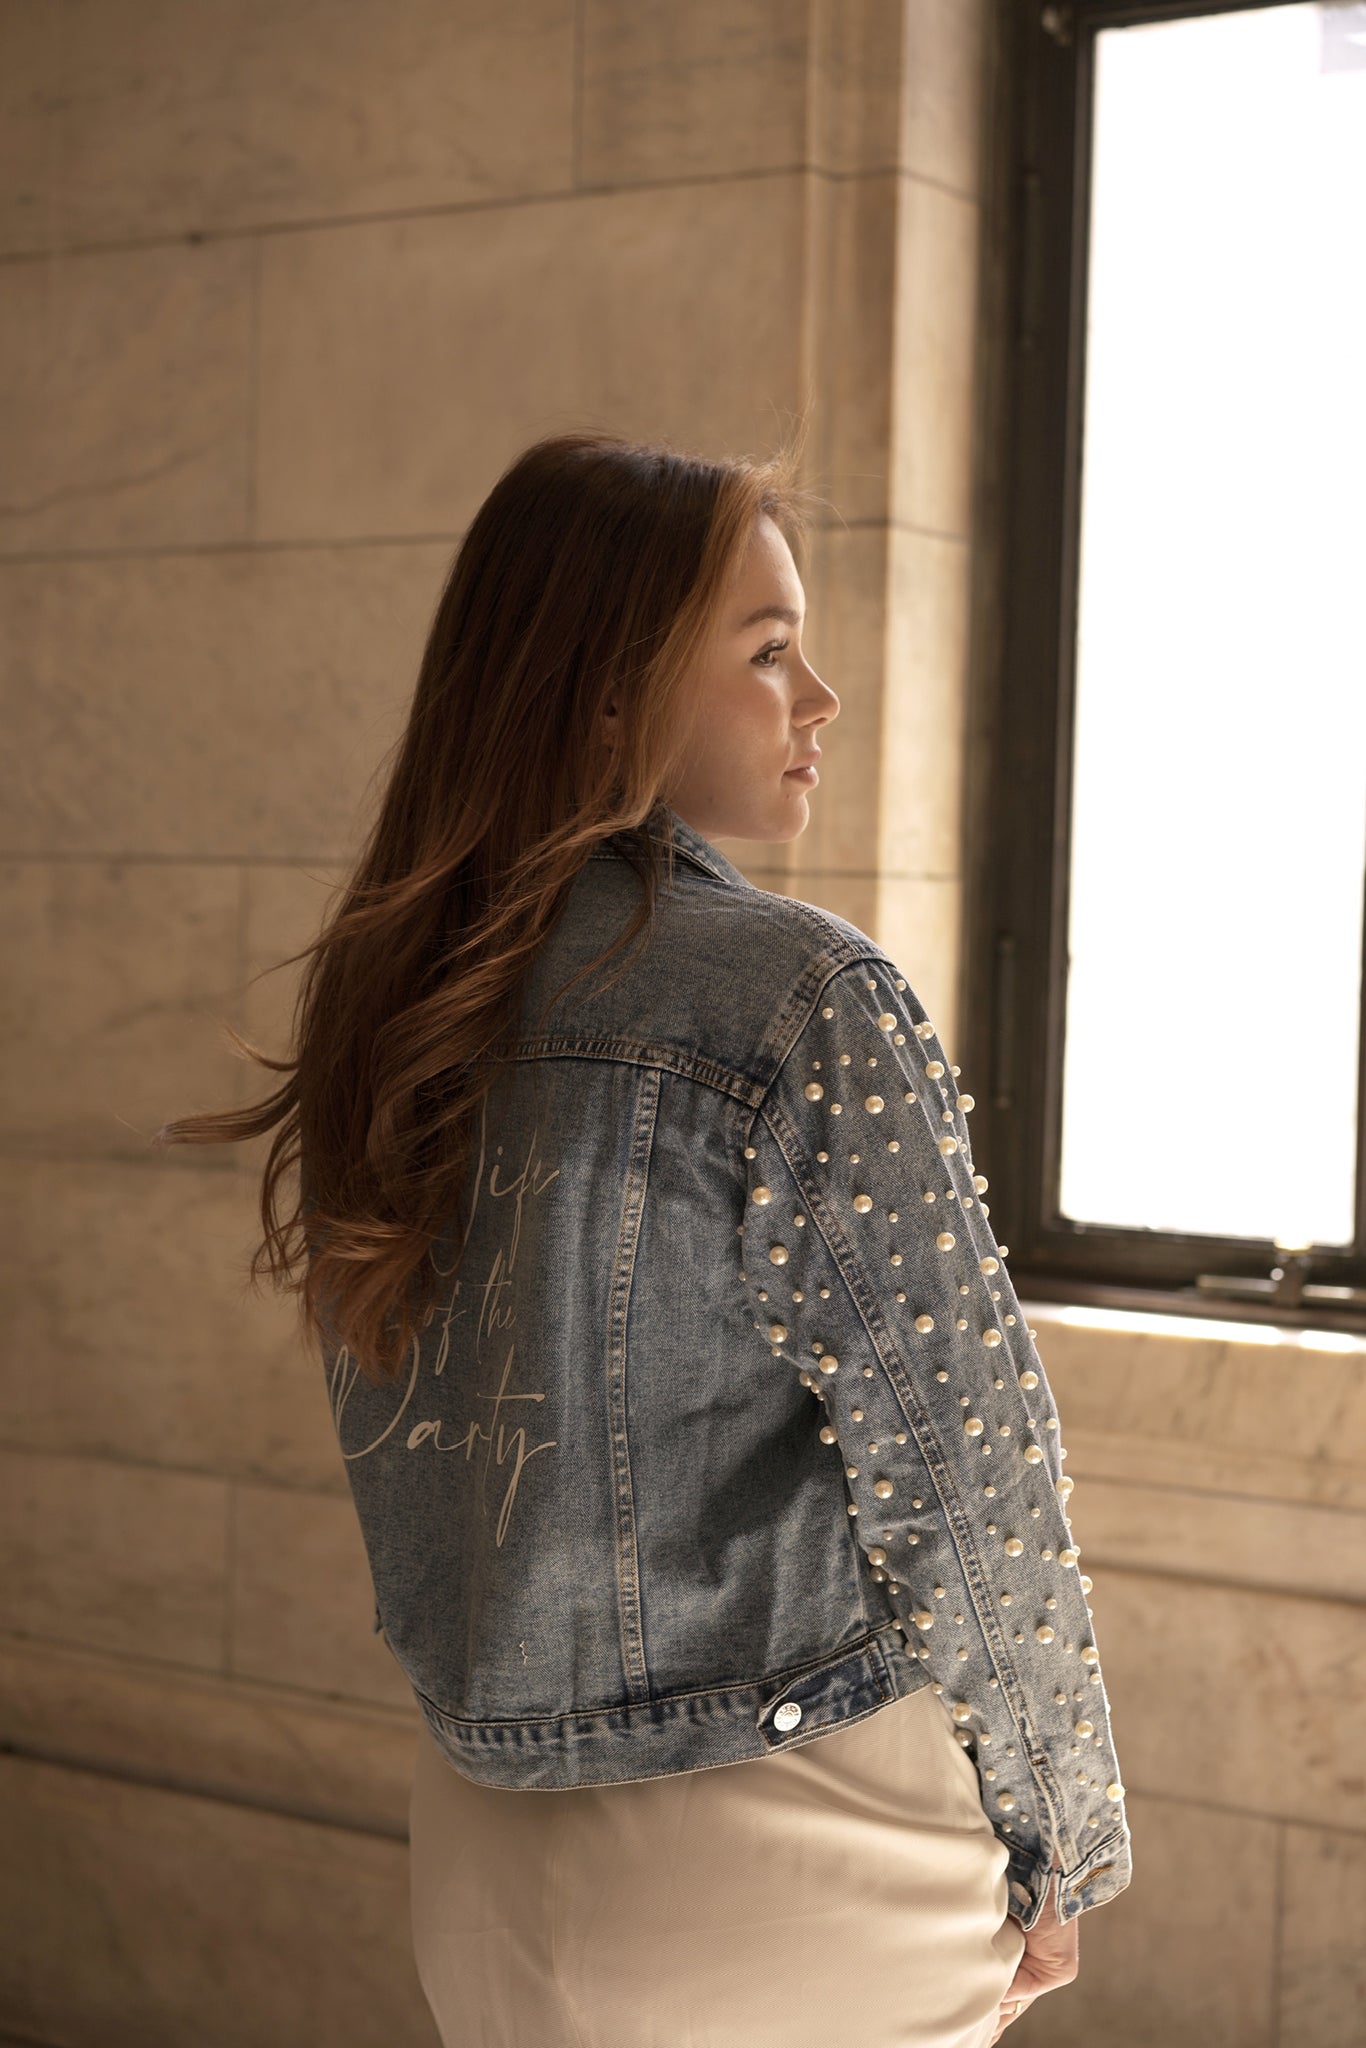 bridal denim jacket with pearls on the sleeves and wife of the party on the personalization.